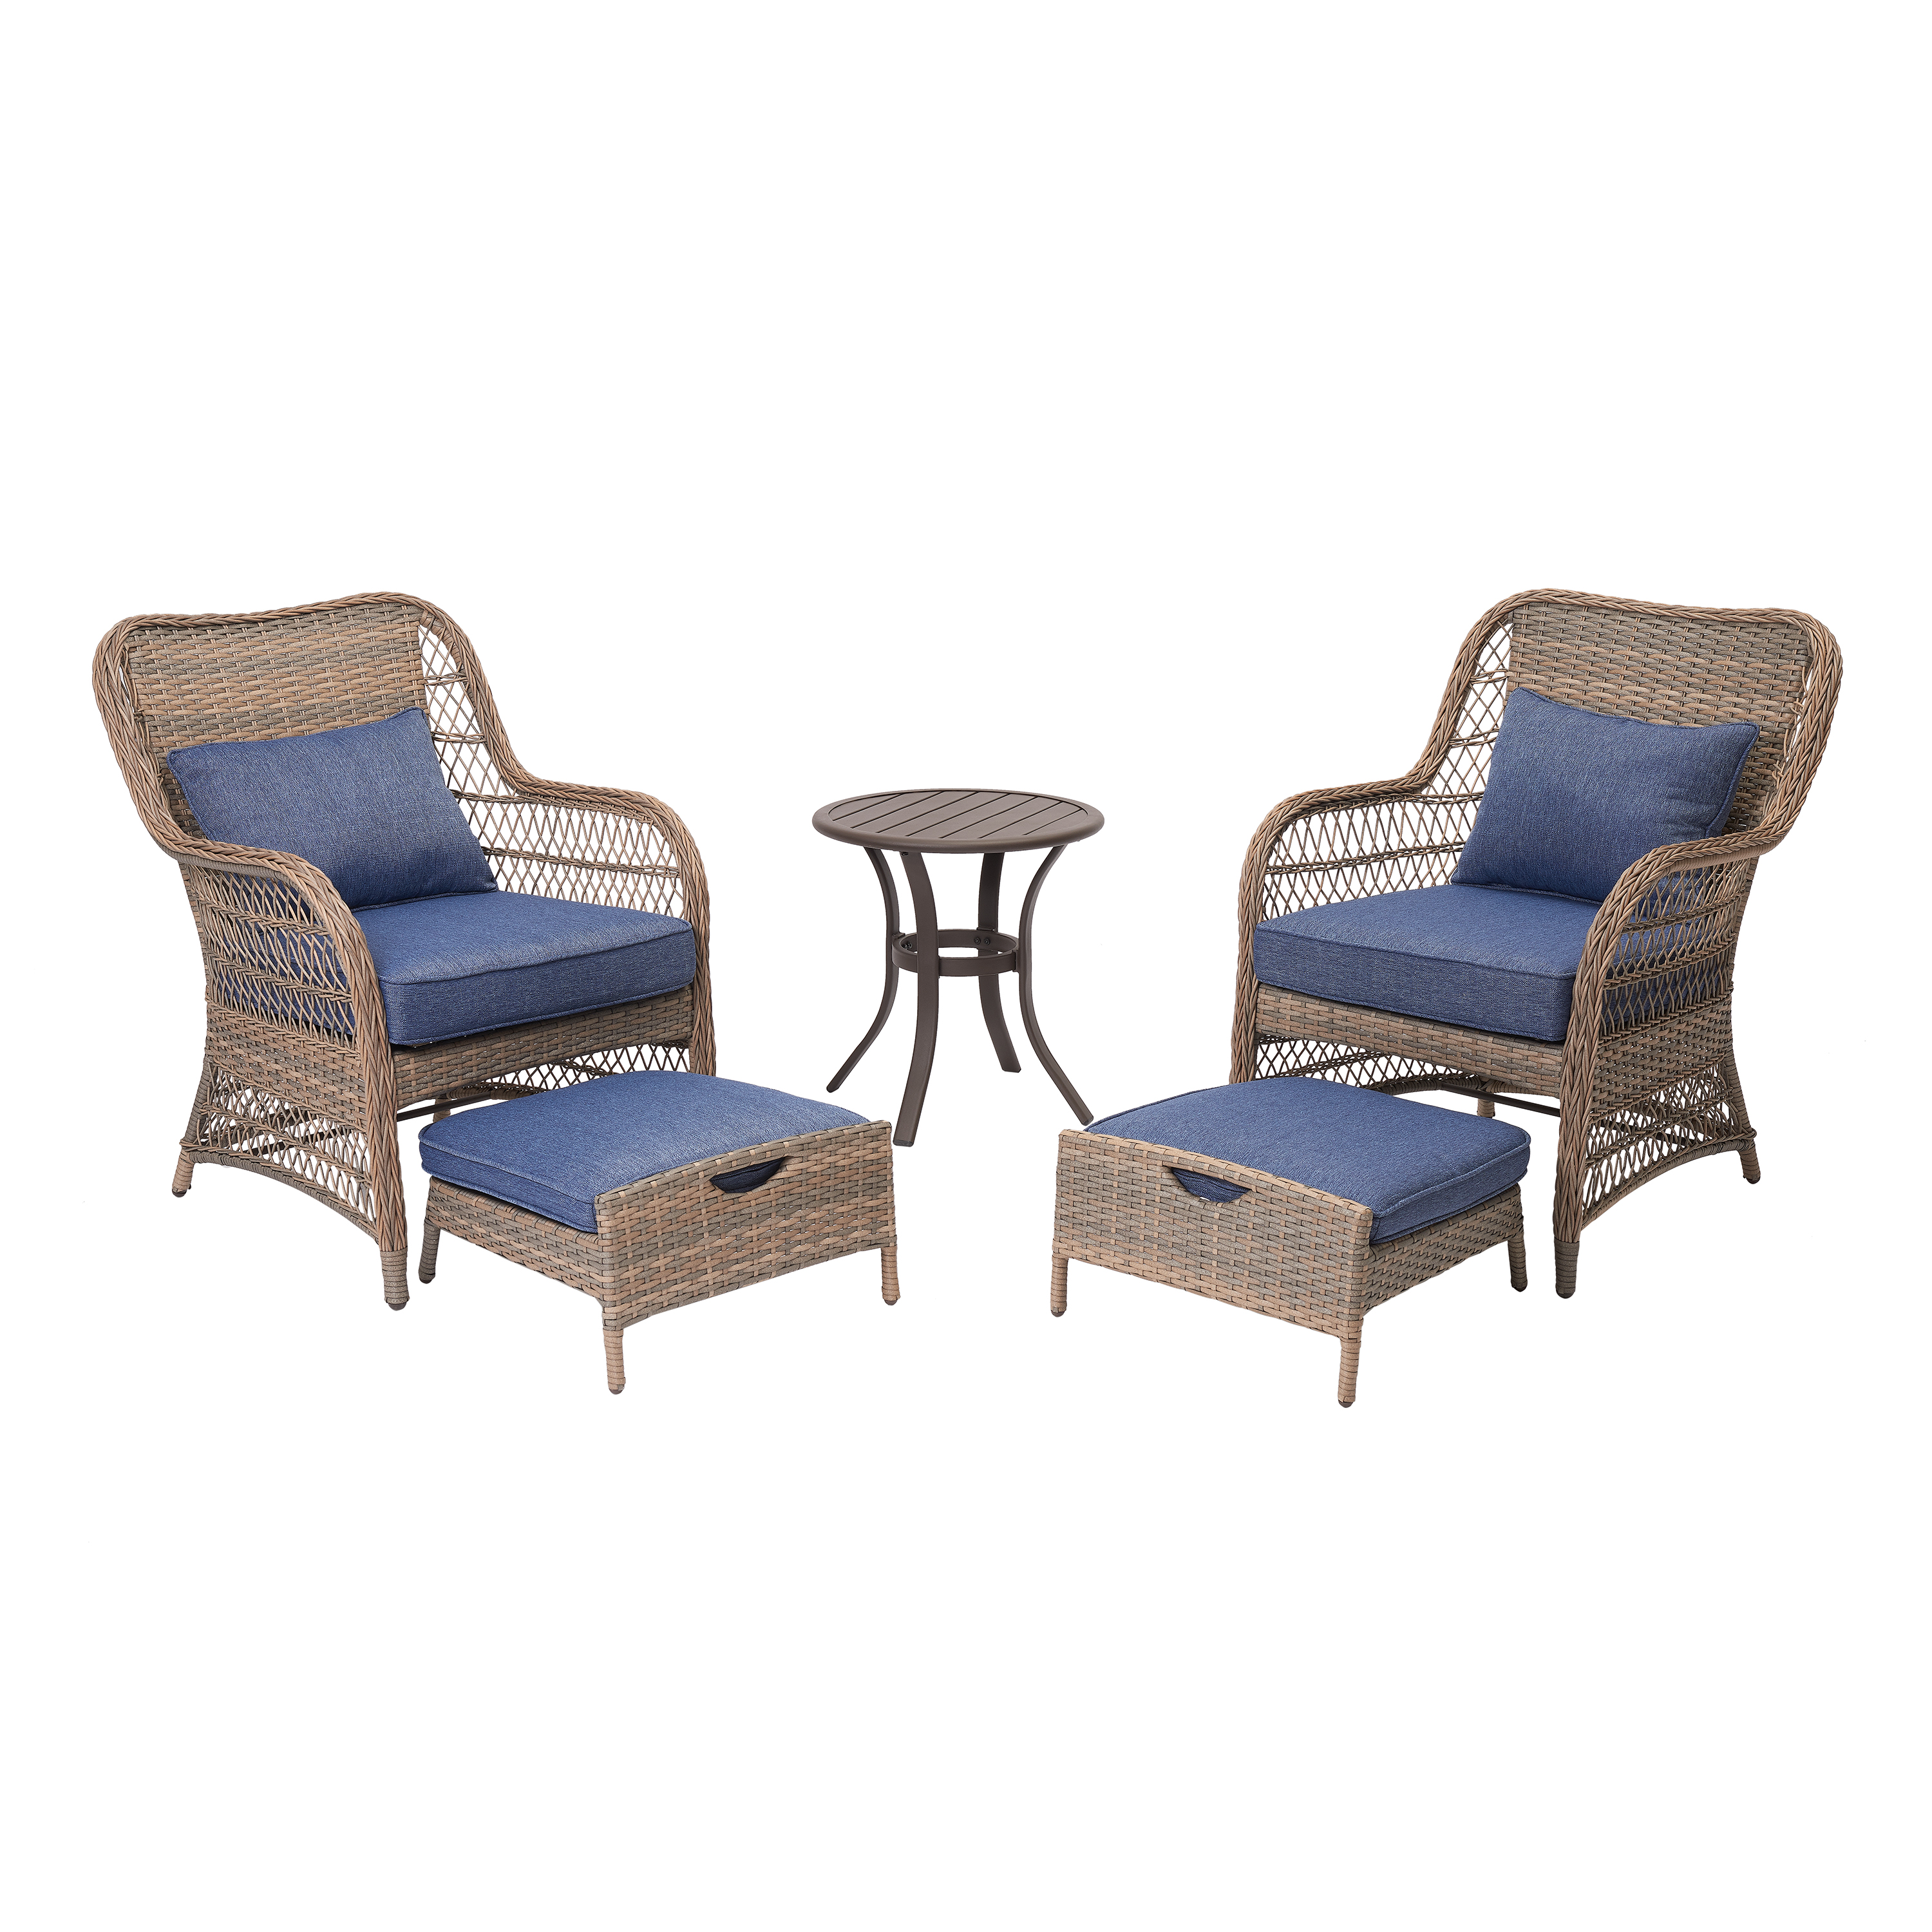 Better Homes & Gardens Auburn 5-Piece Wicker Patio Chat Set with Blue Cushions - image 5 of 8